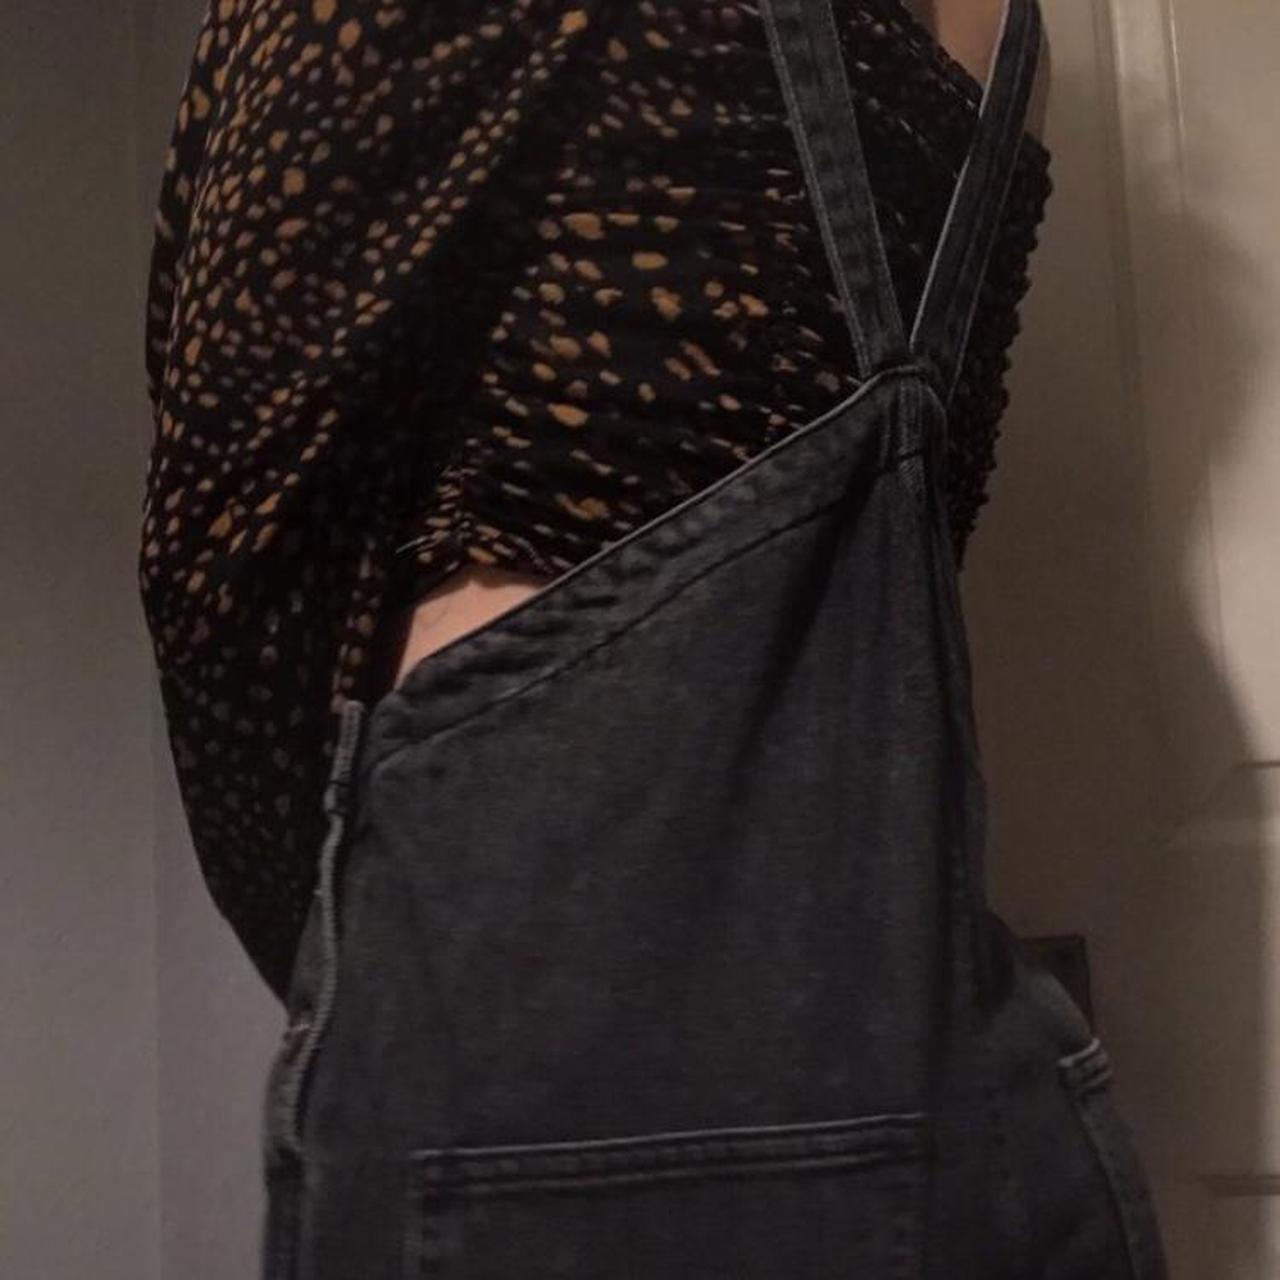 Product Image 2 - Faded, black top shop dungarees